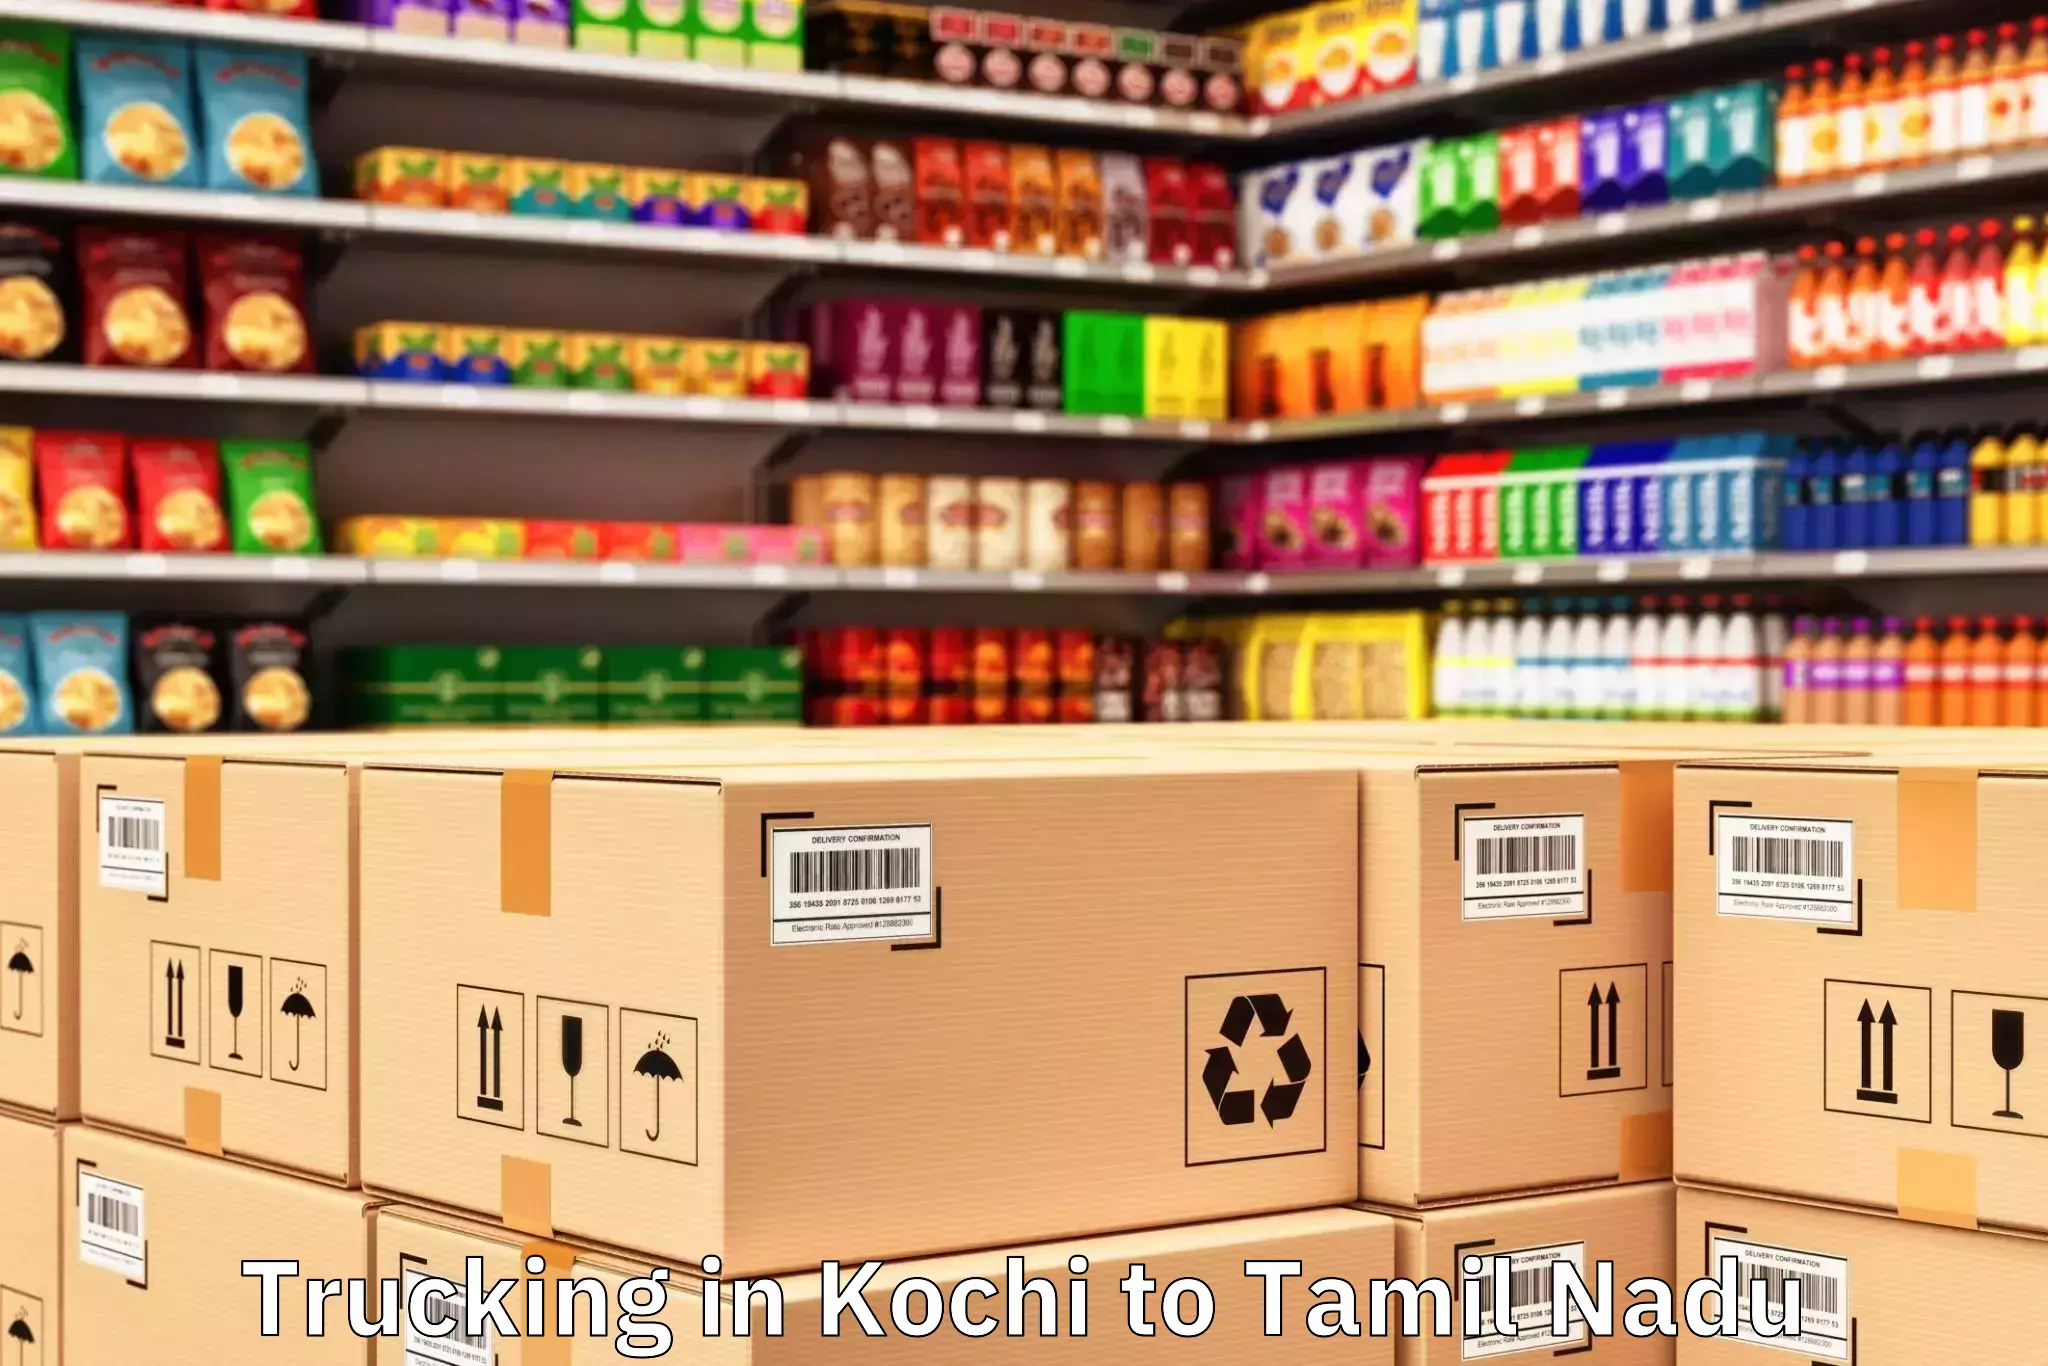 Trusted Kochi to Meenakshi Academy Of Higher Education And Research Chennai Trucking